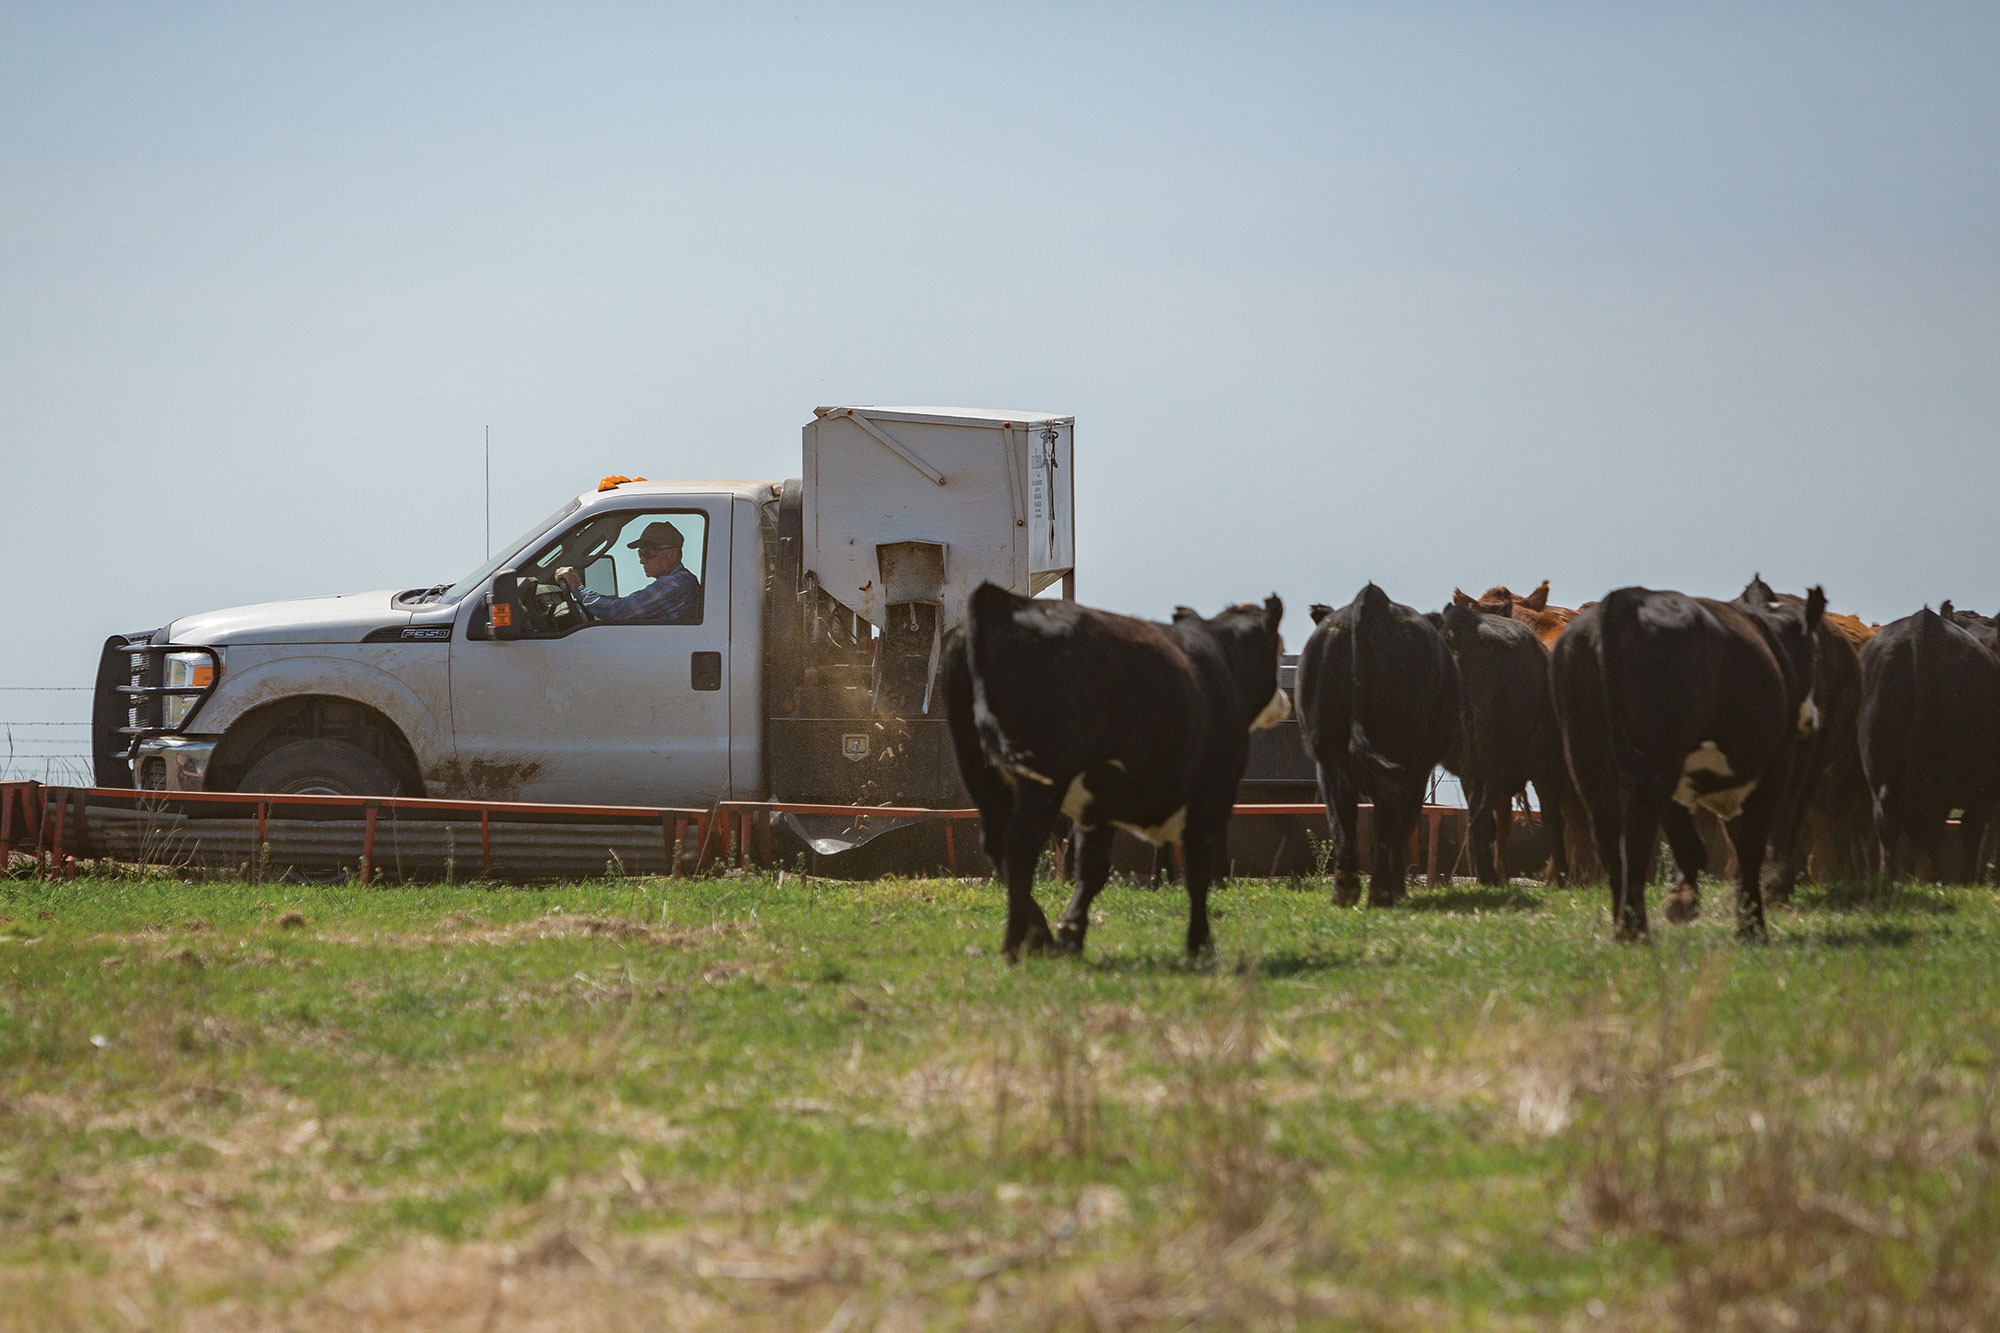 Lee Wayne Stepp feeds cattle on his ranch near Comanche, Oklahoma, on April 12, 2018.